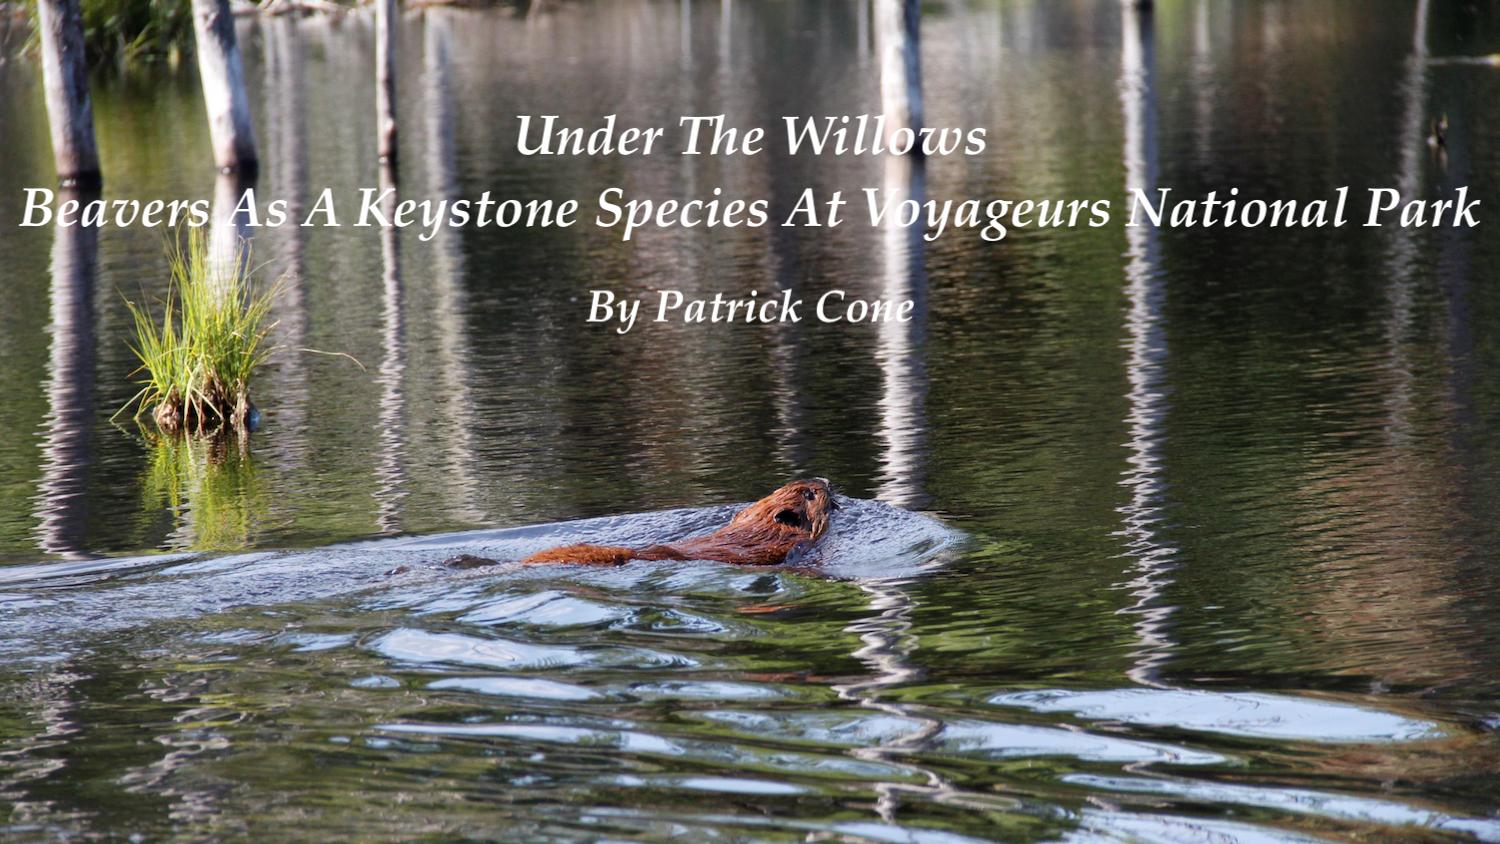 Under The Willows | Beavers As A Keystone Species At Voyageurs National Park